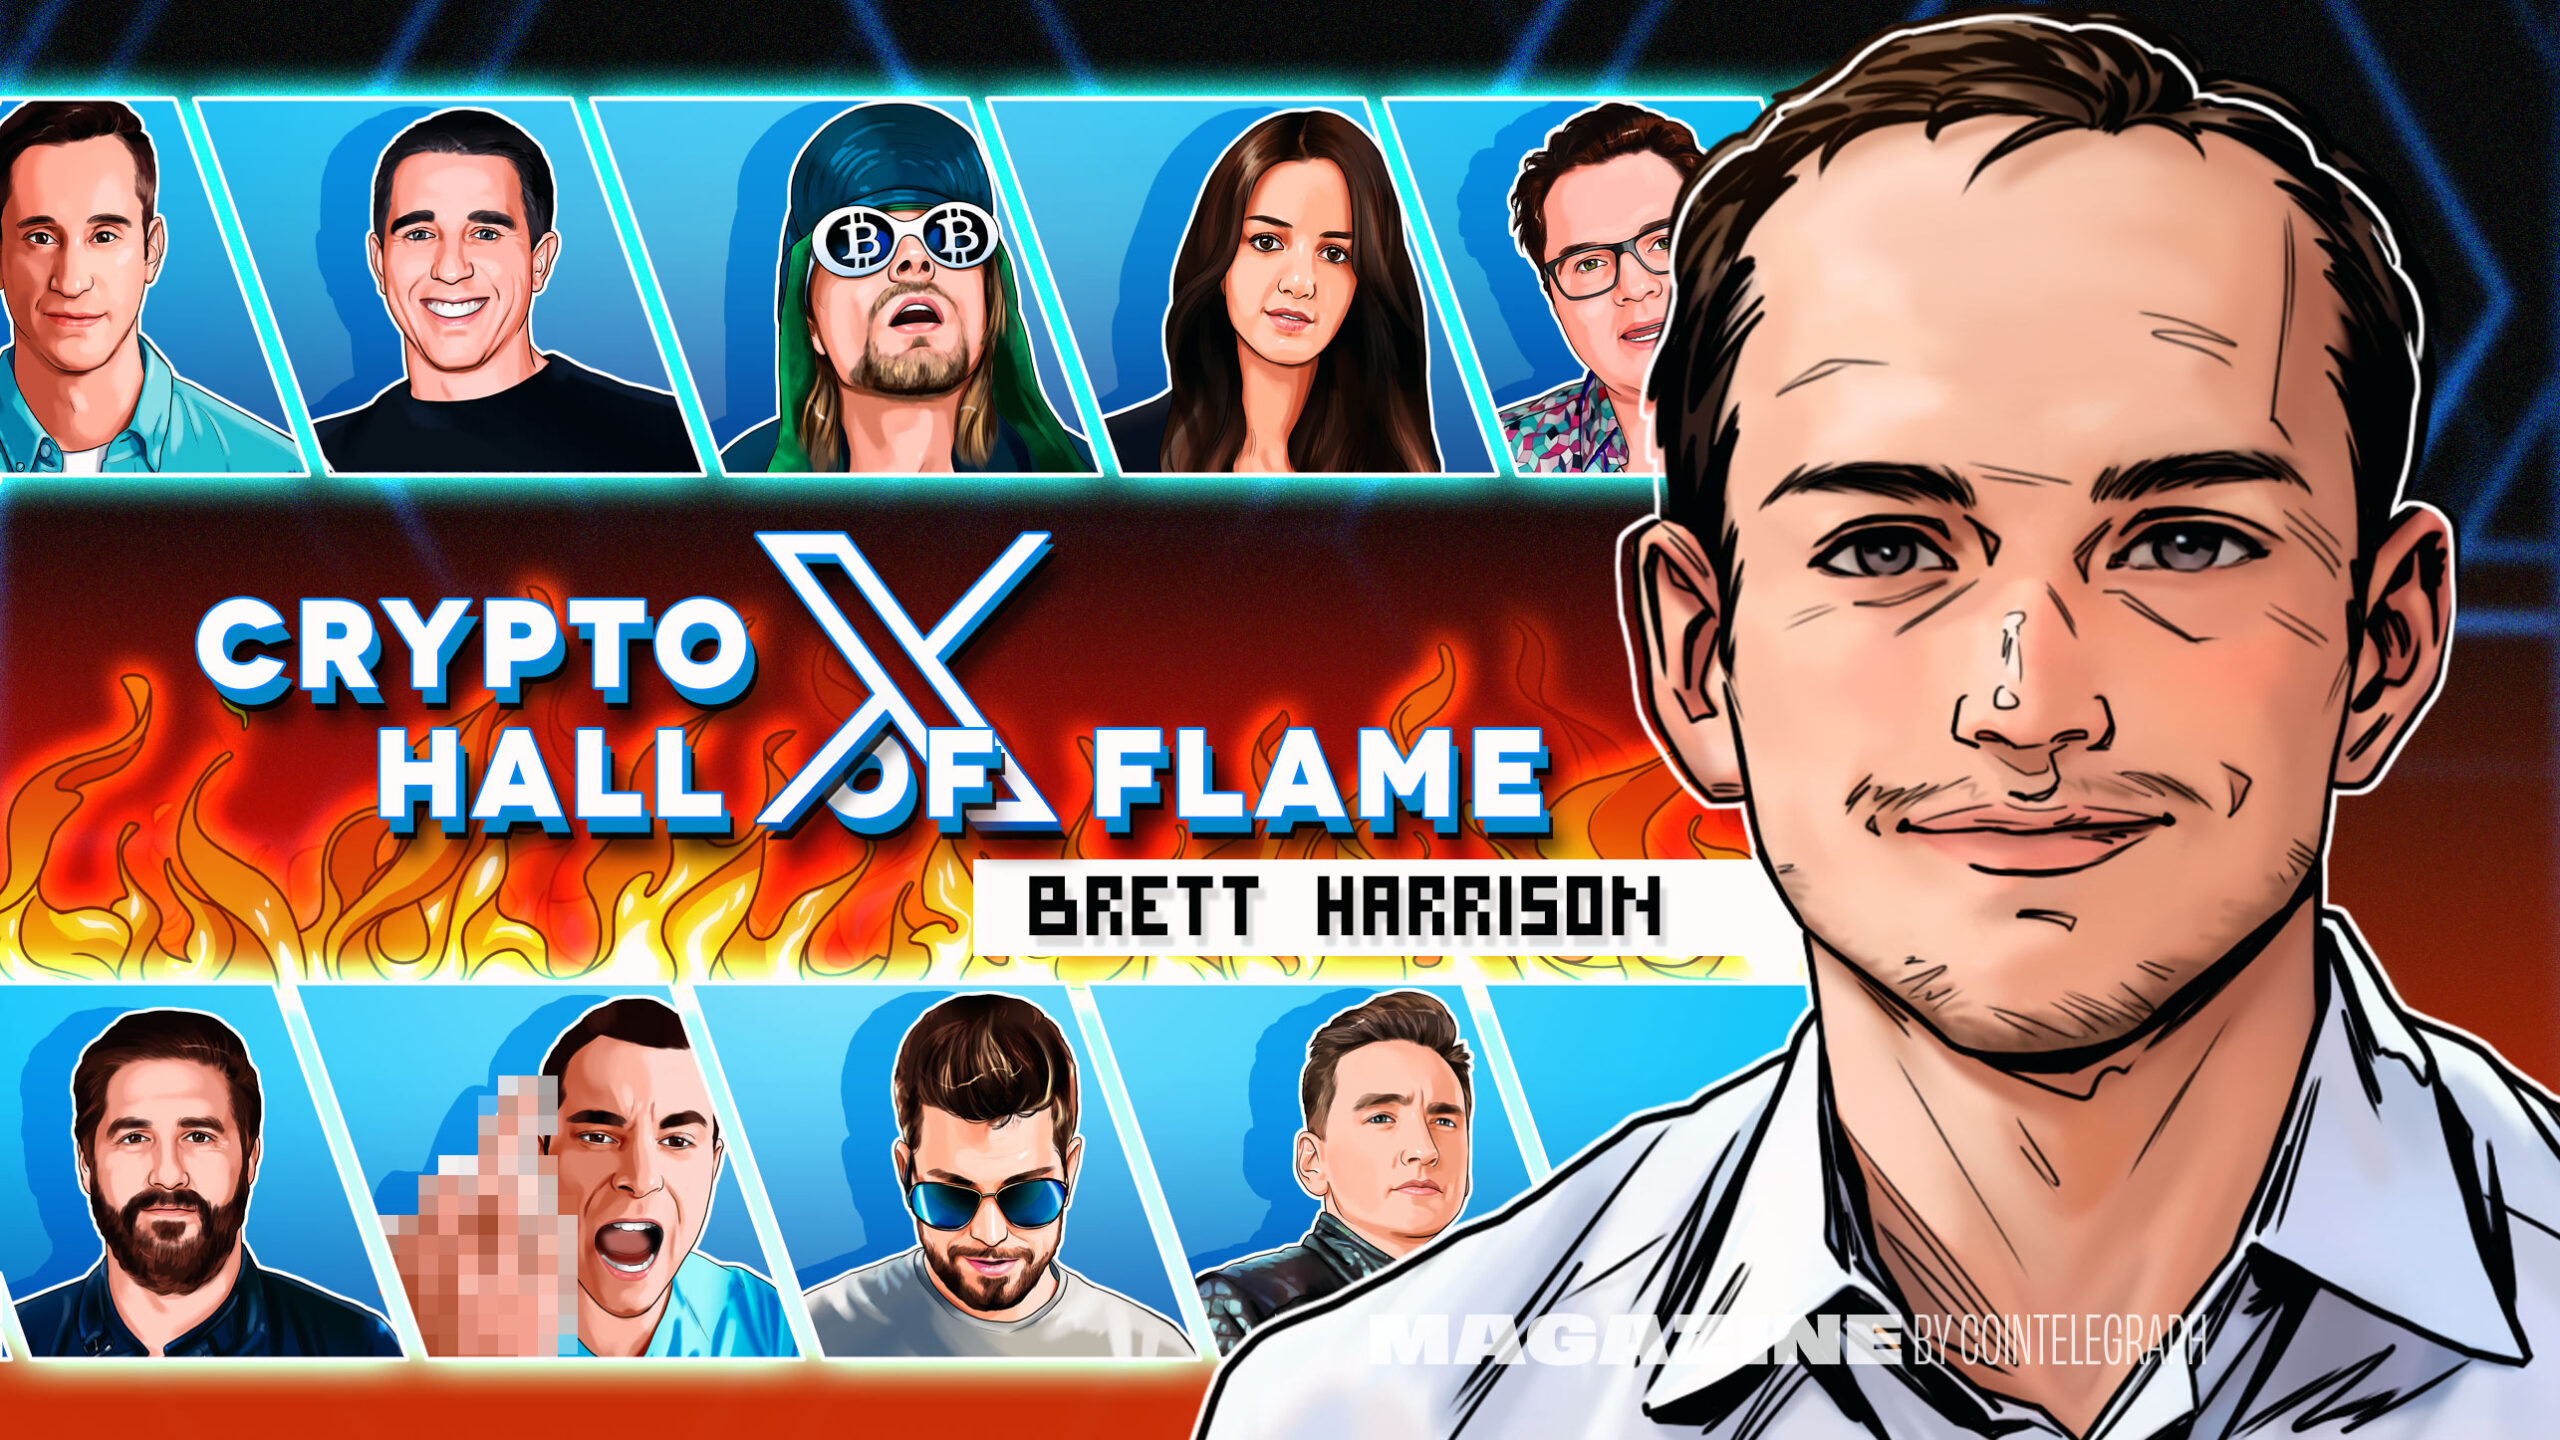 Expect-‘records-broken’-by-bitcoin-etf:-brett-harrison-(ex-ftx-us),-x-hall-of-flame